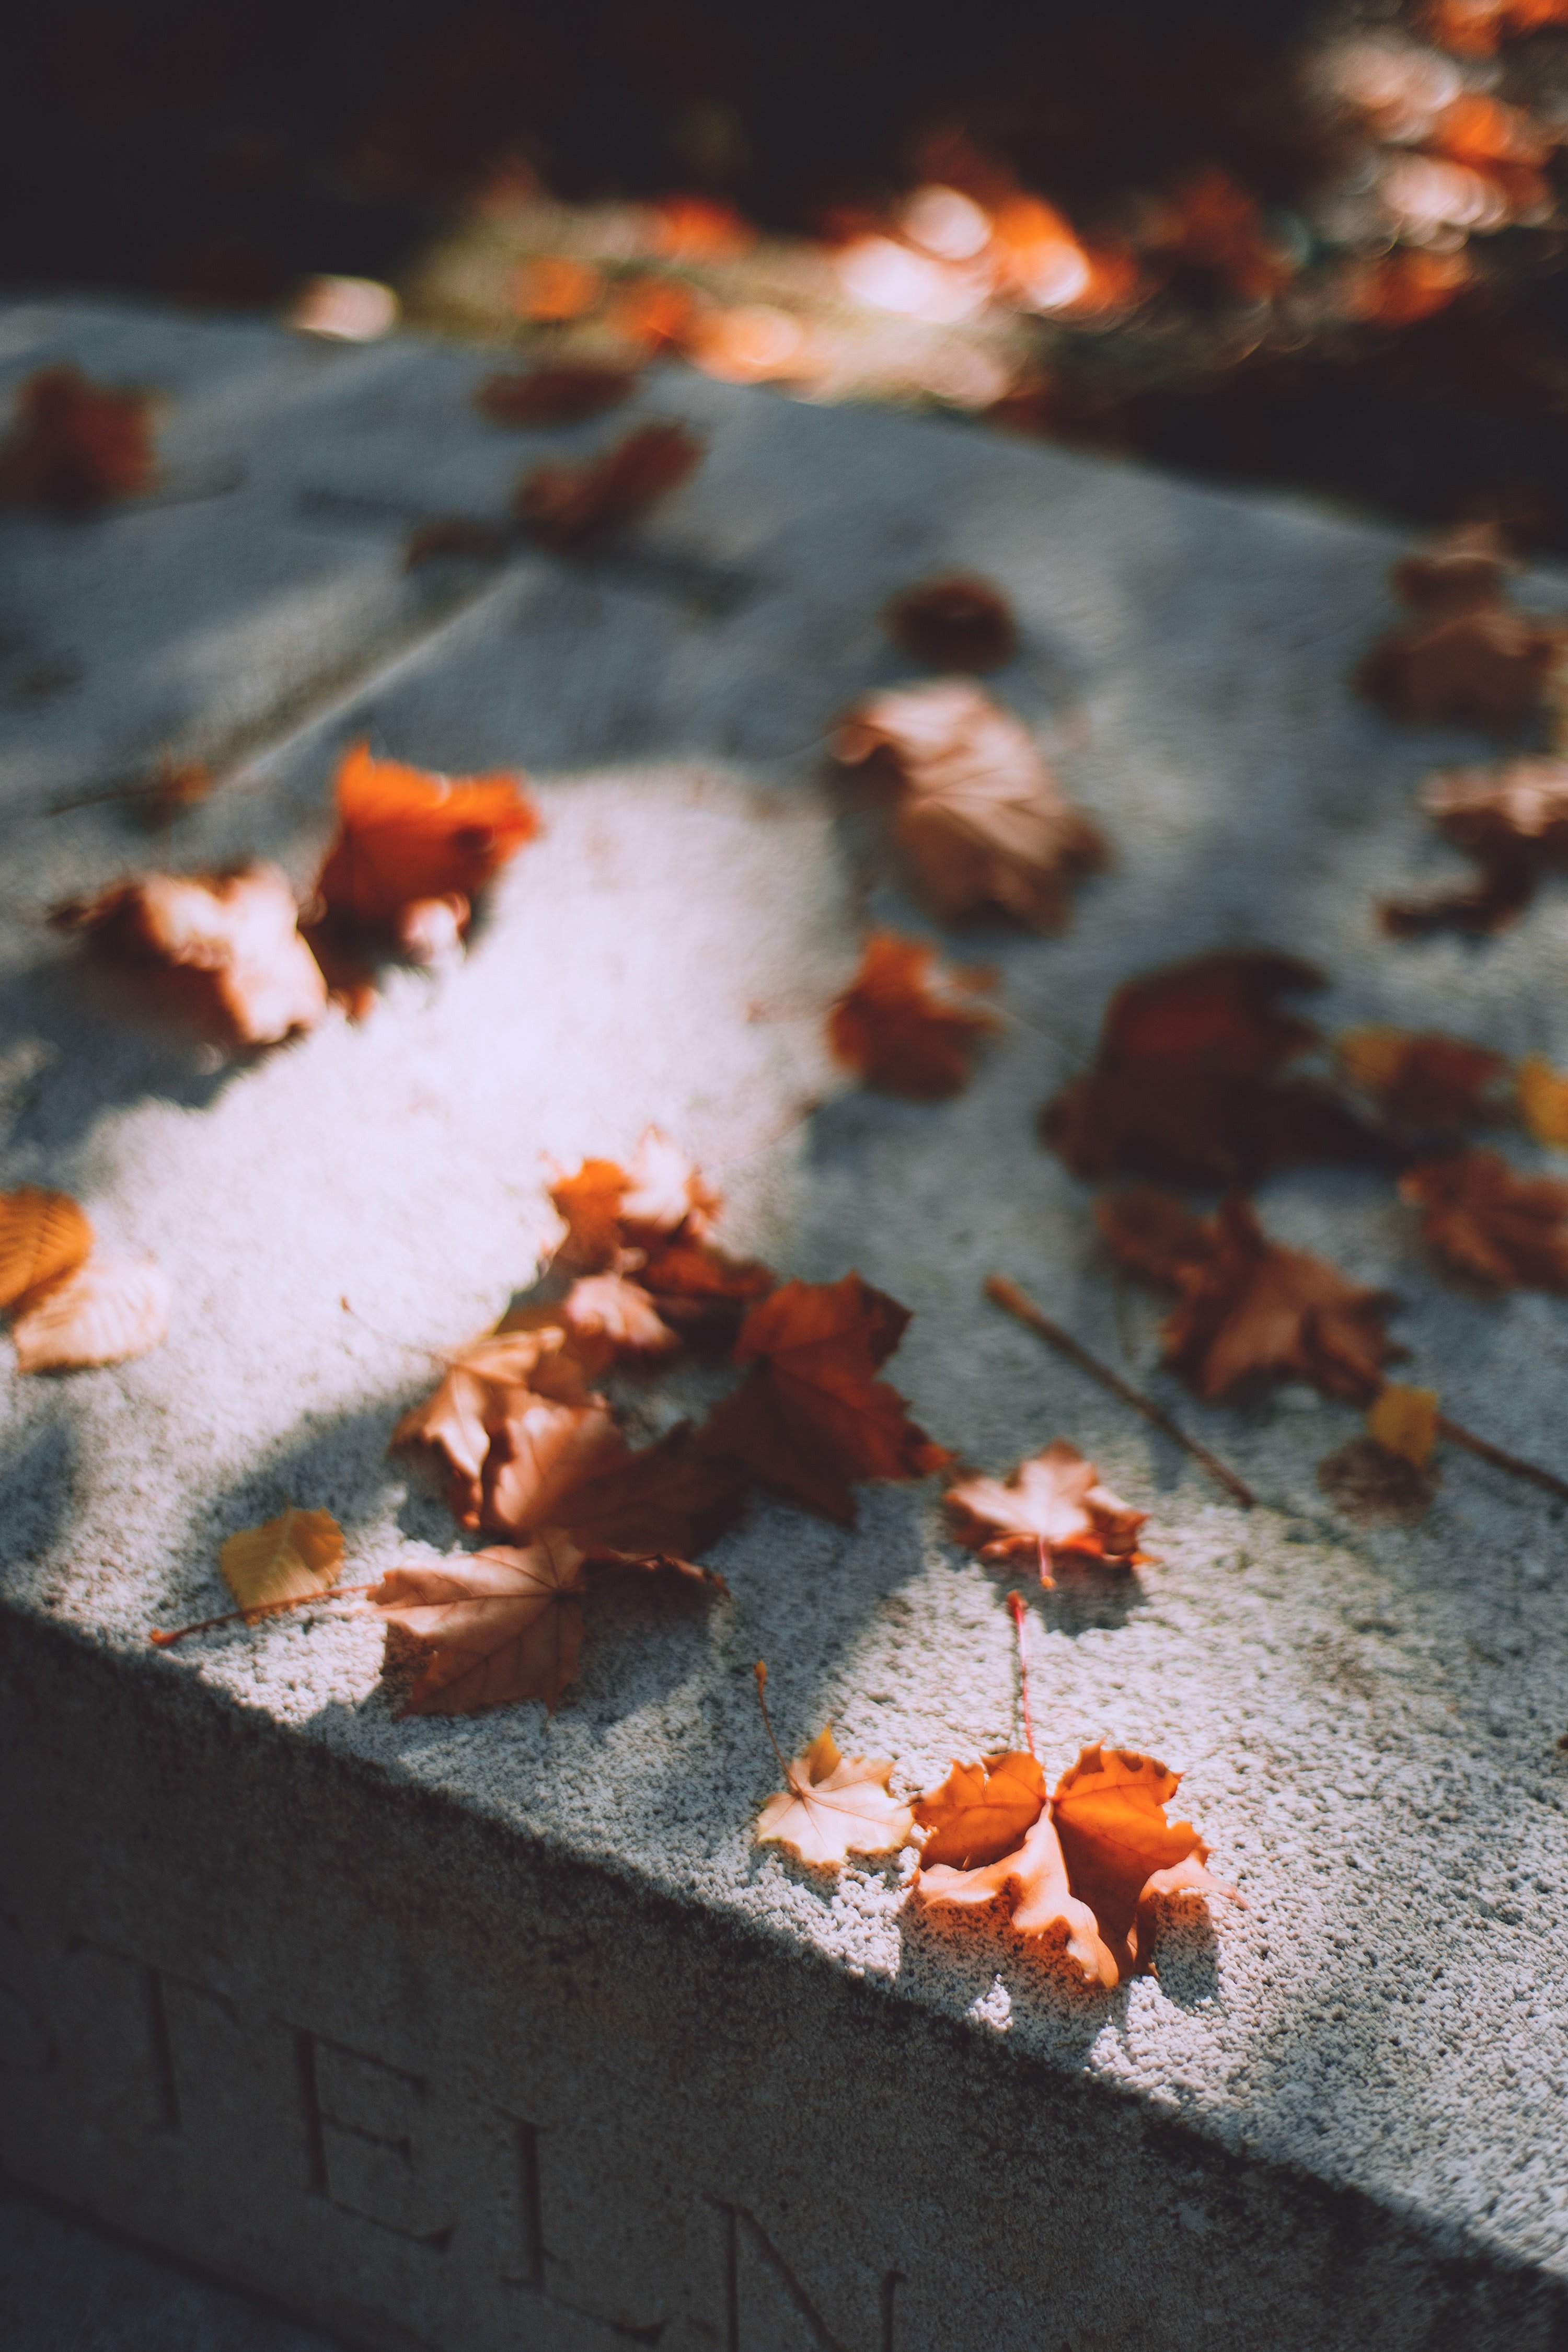 A burial stone | Photo: Pexels